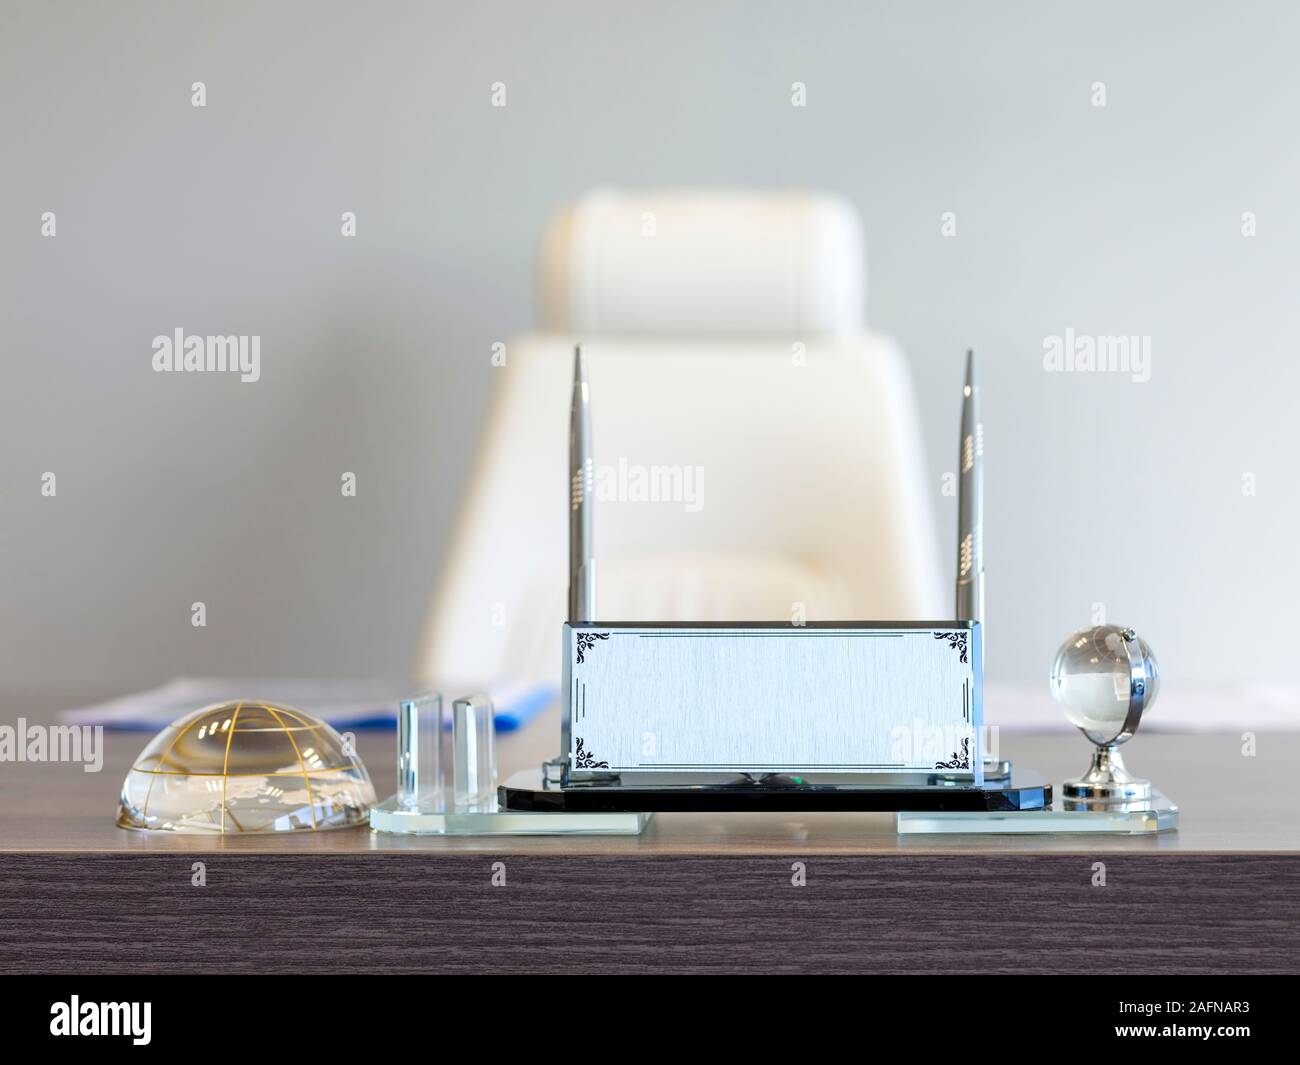 name Holder on the office chair and desk Stock Photo